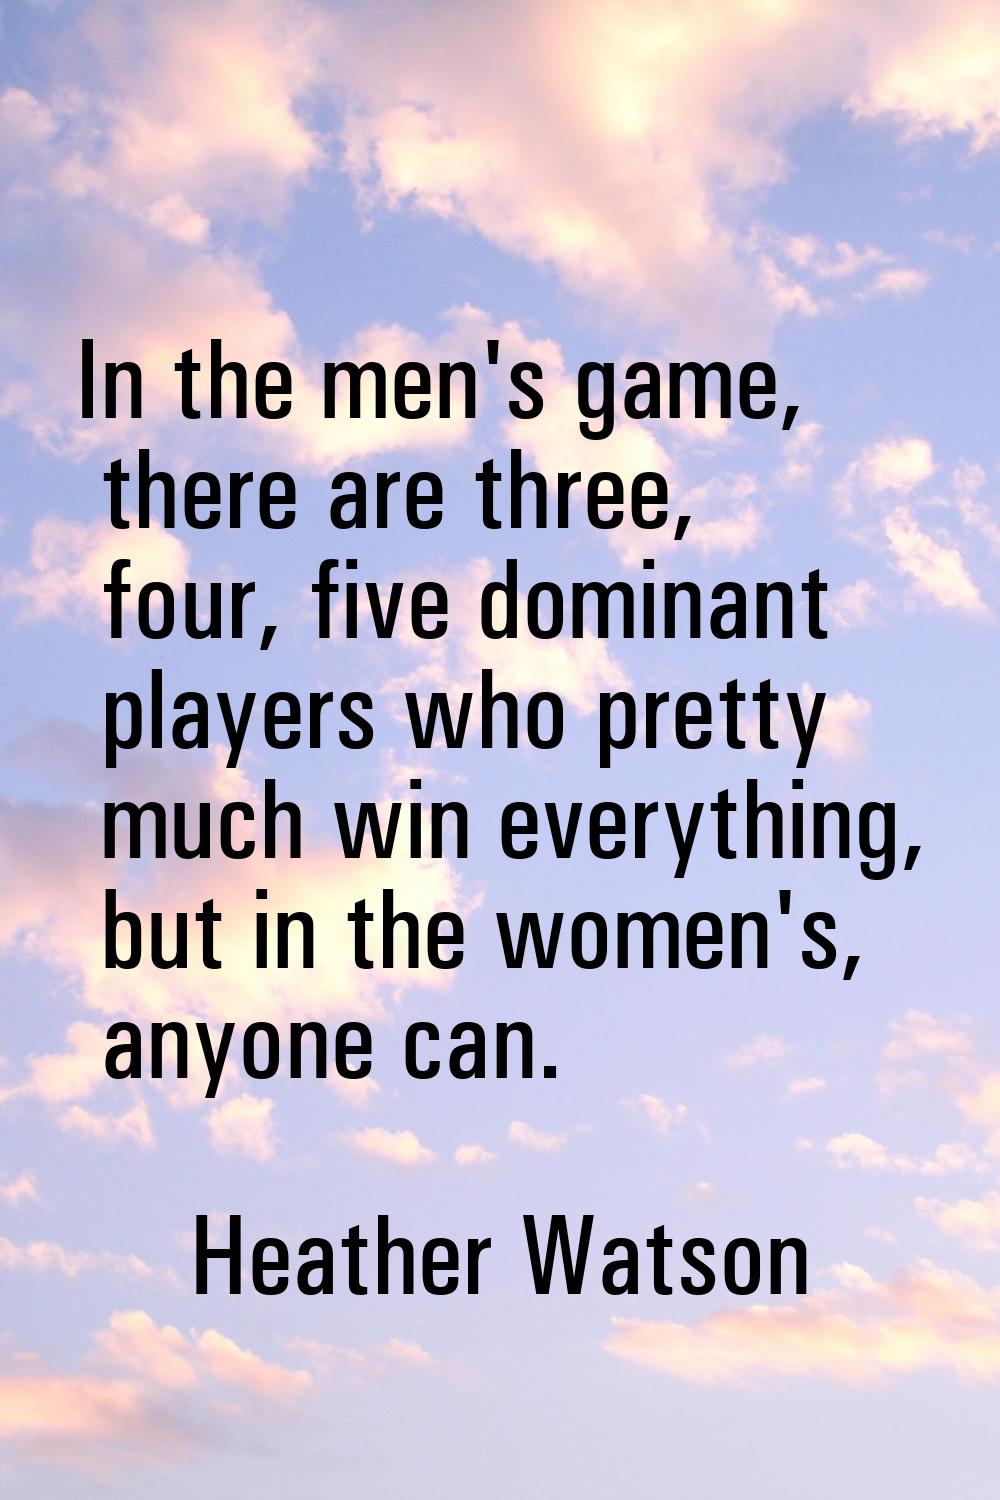 In the men's game, there are three, four, five dominant players who pretty much win everything, but